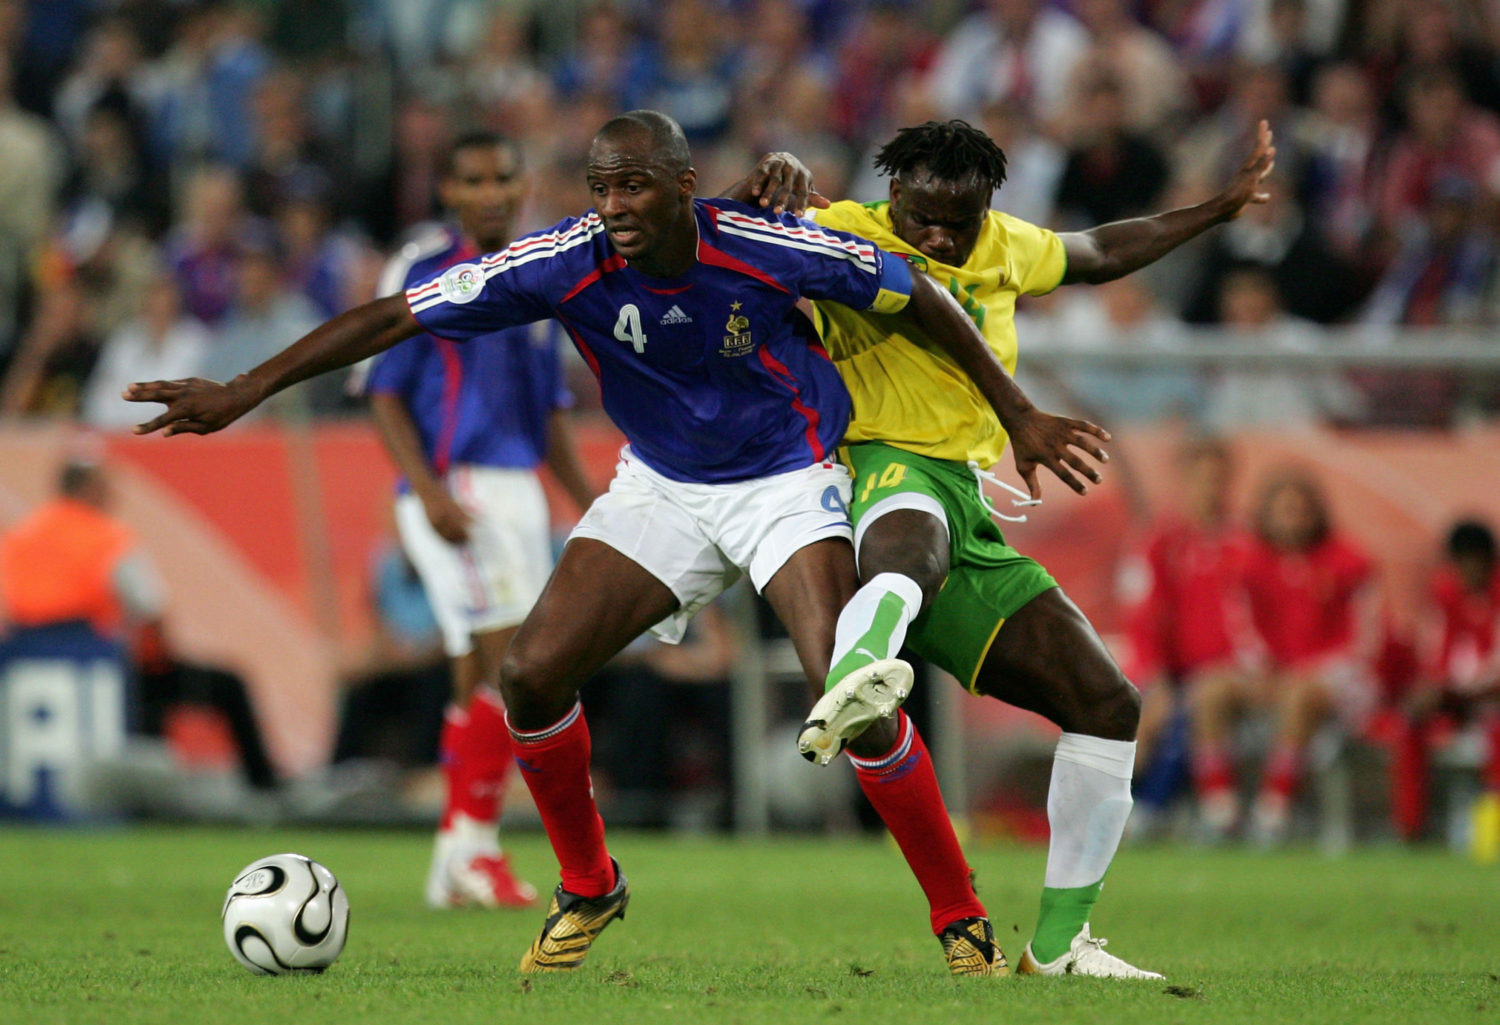 Patrick Vieira celebrates his African identity while criticizing football's  lack of diversity in management